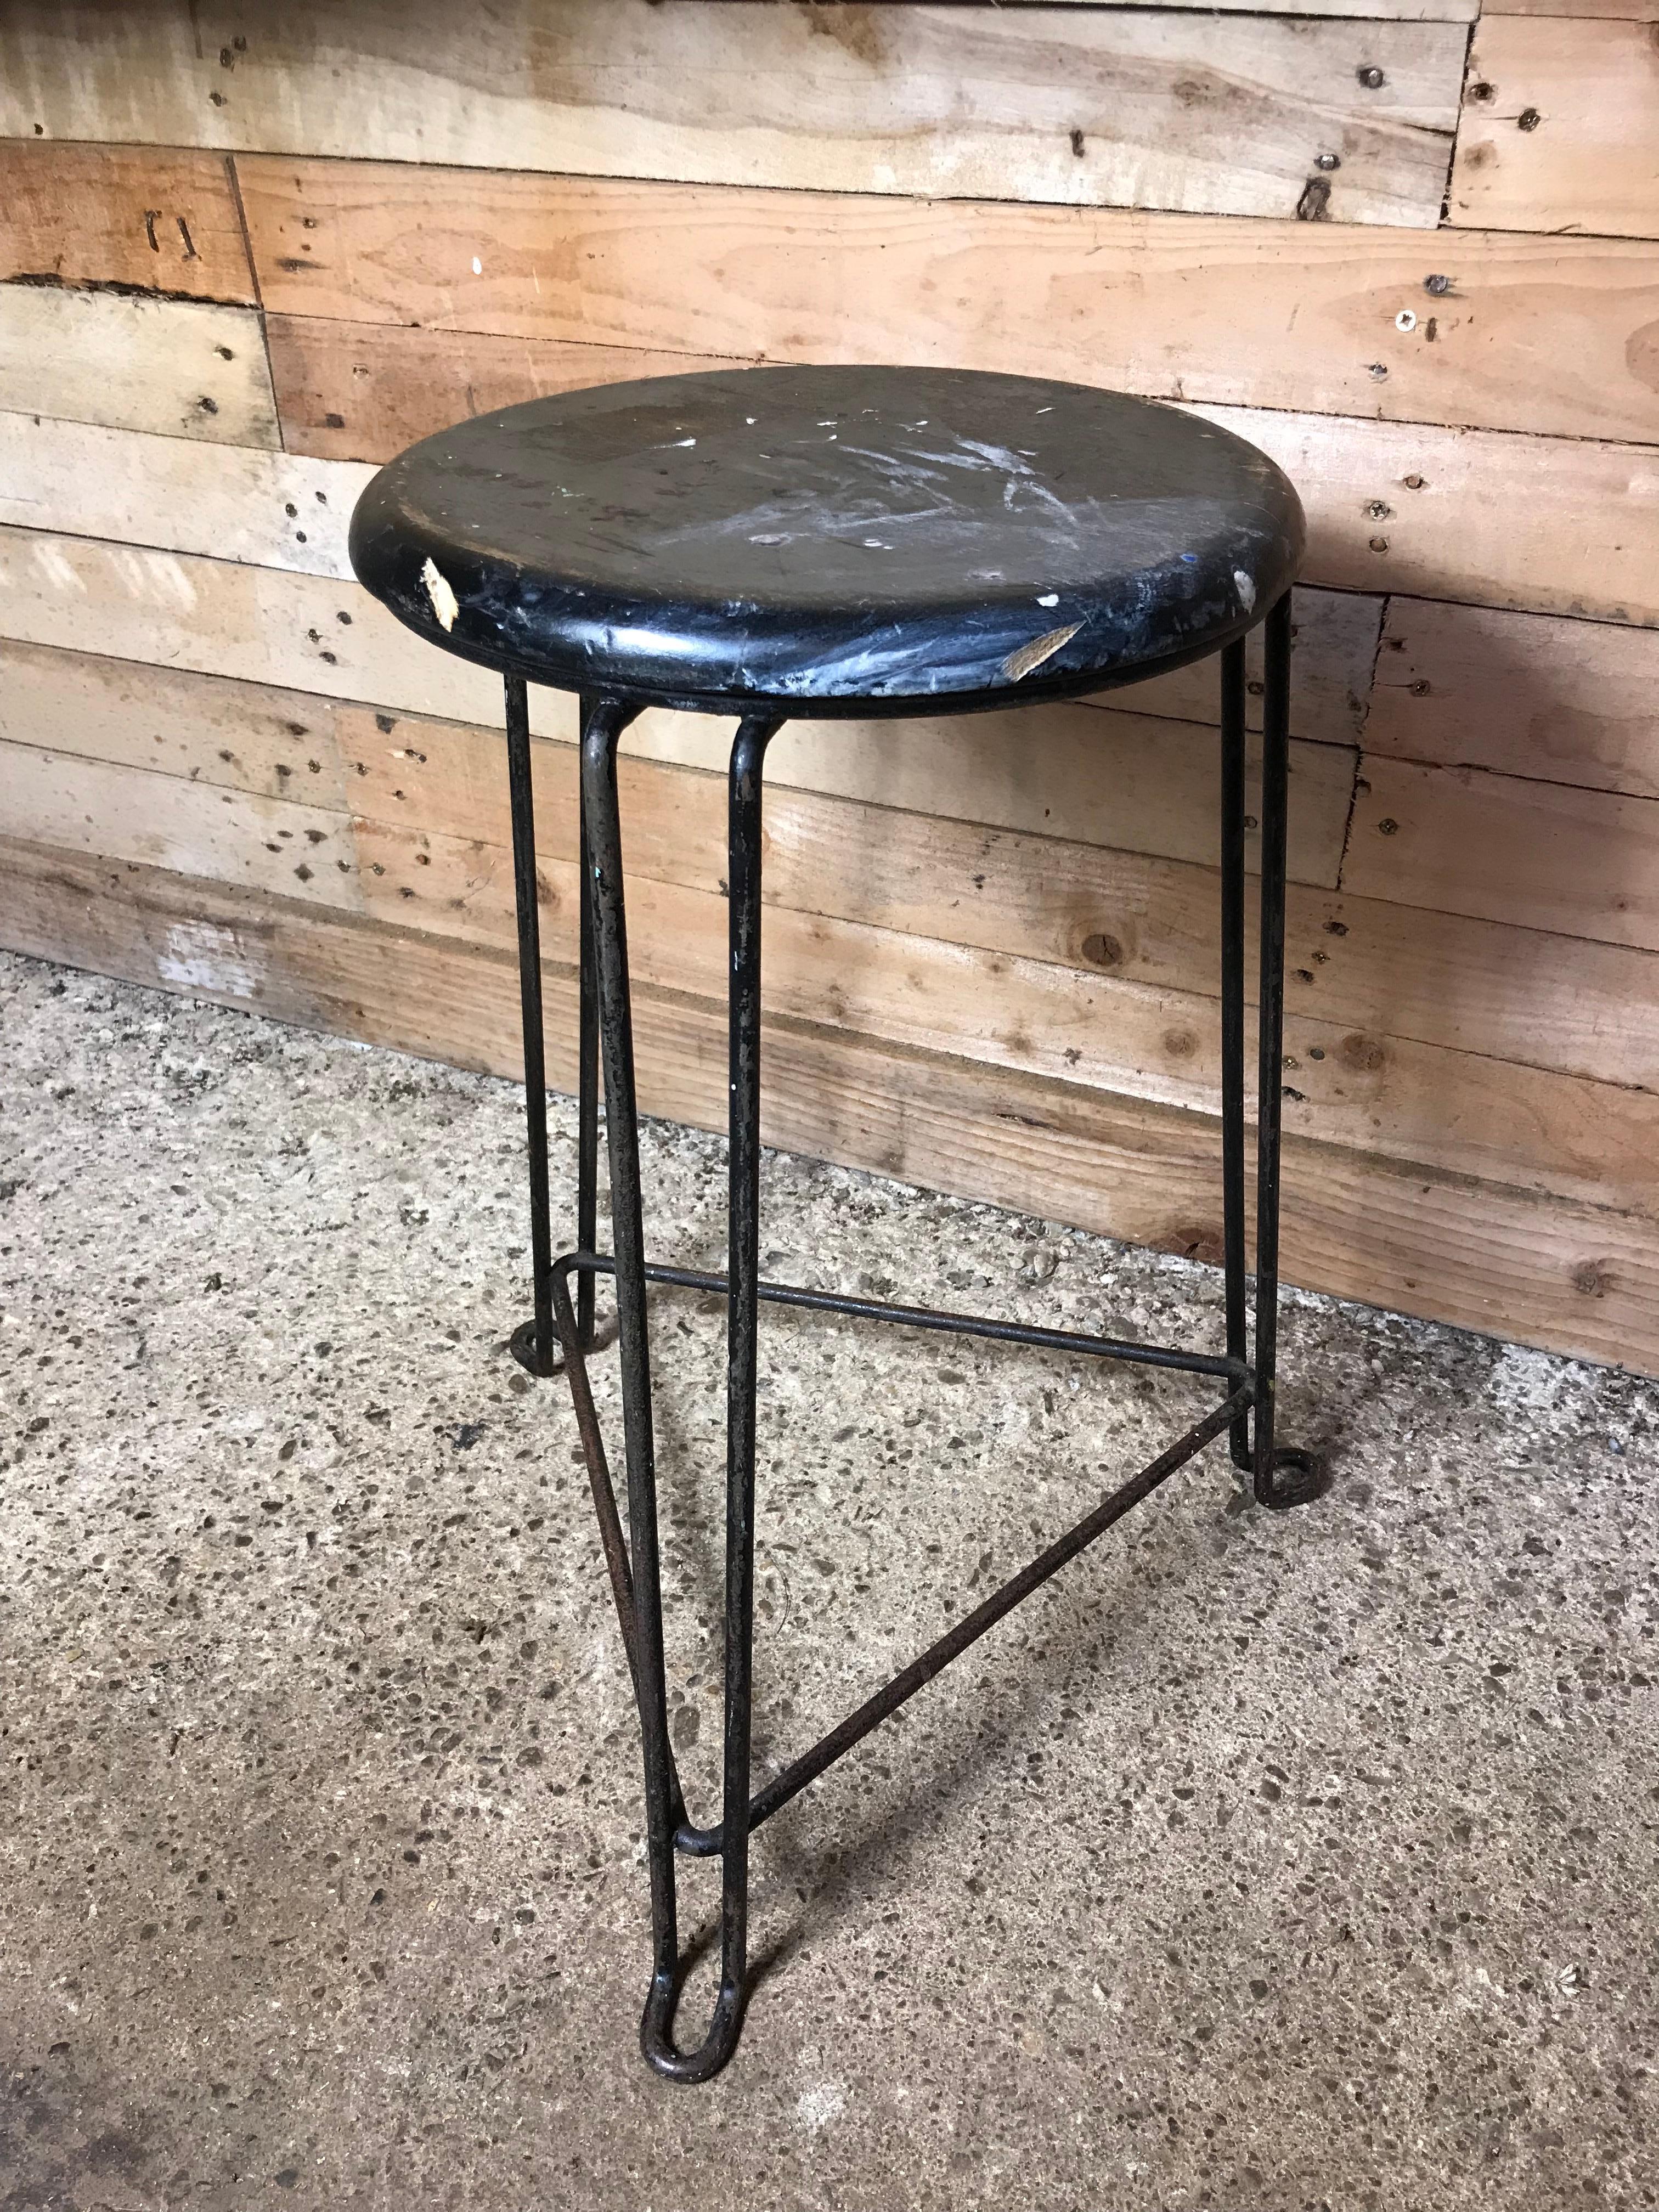 Dutch Retro 1960s Wooden Seat with Metal Frame Tomado Stool 'Black Seat' For Sale